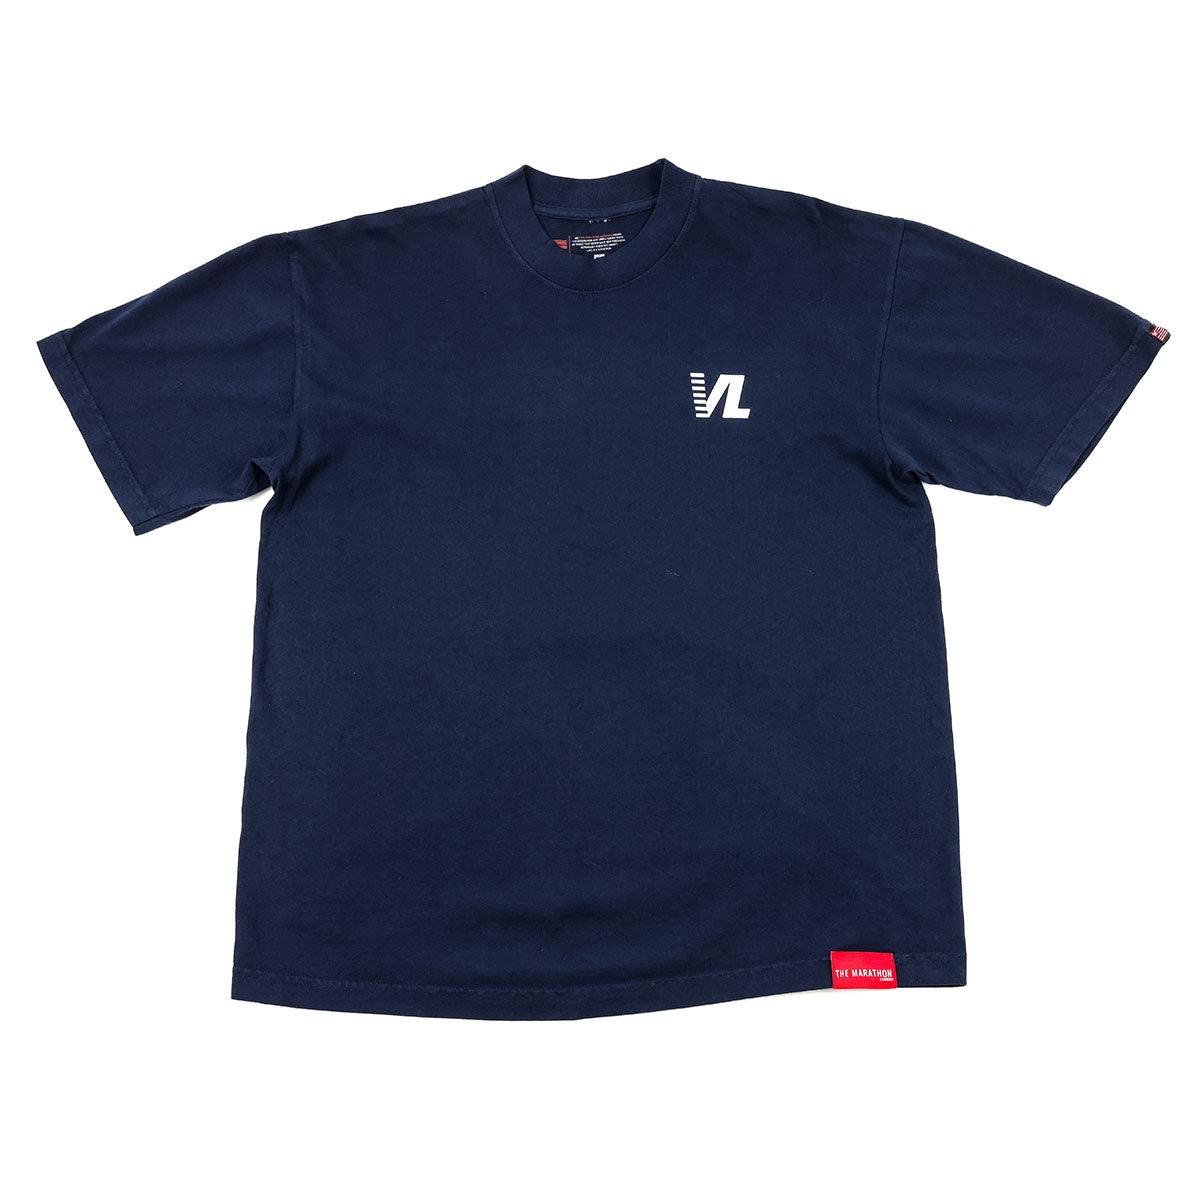 Victory Lap VL T-Shirt - Navy/White - Front